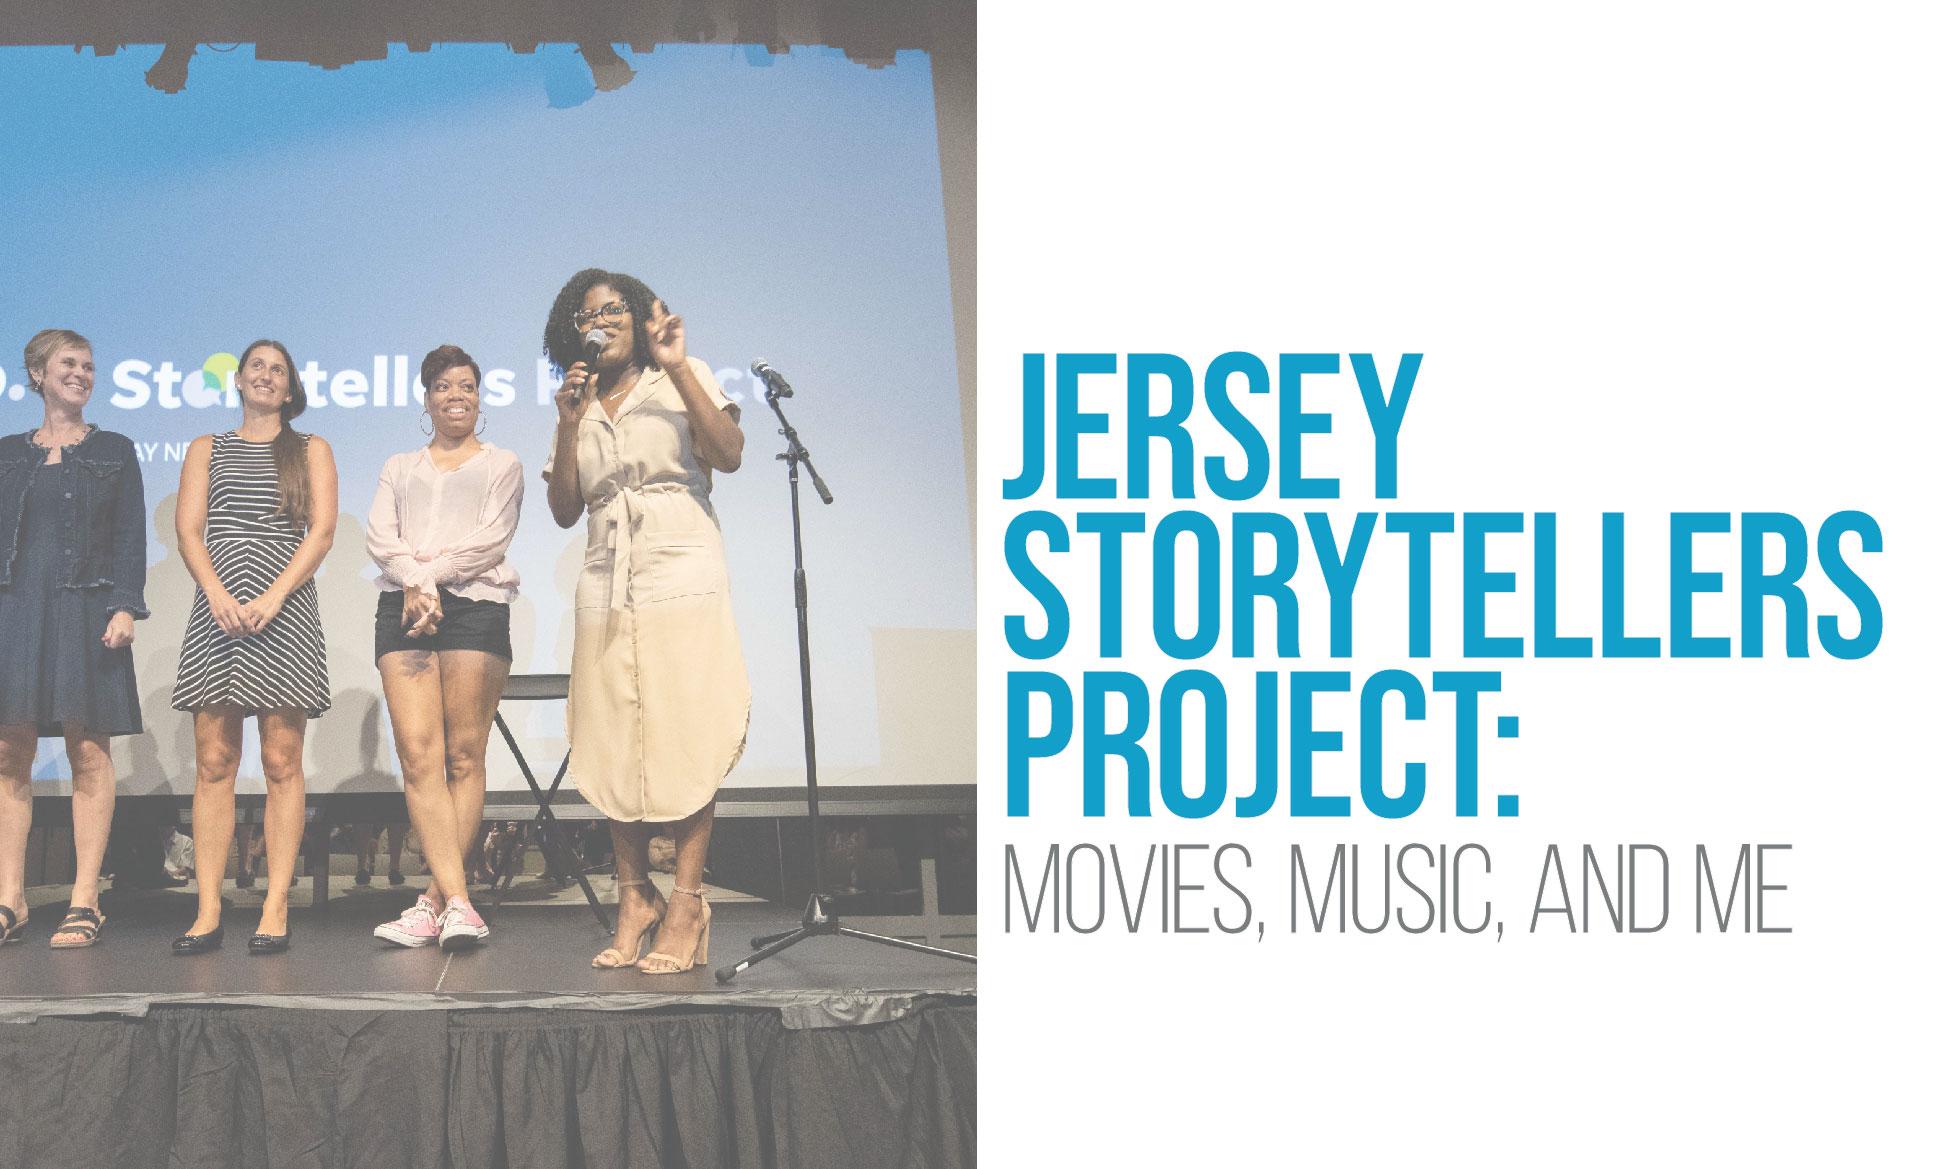 Jersey Storytellers Project: Movies, Music, and Me